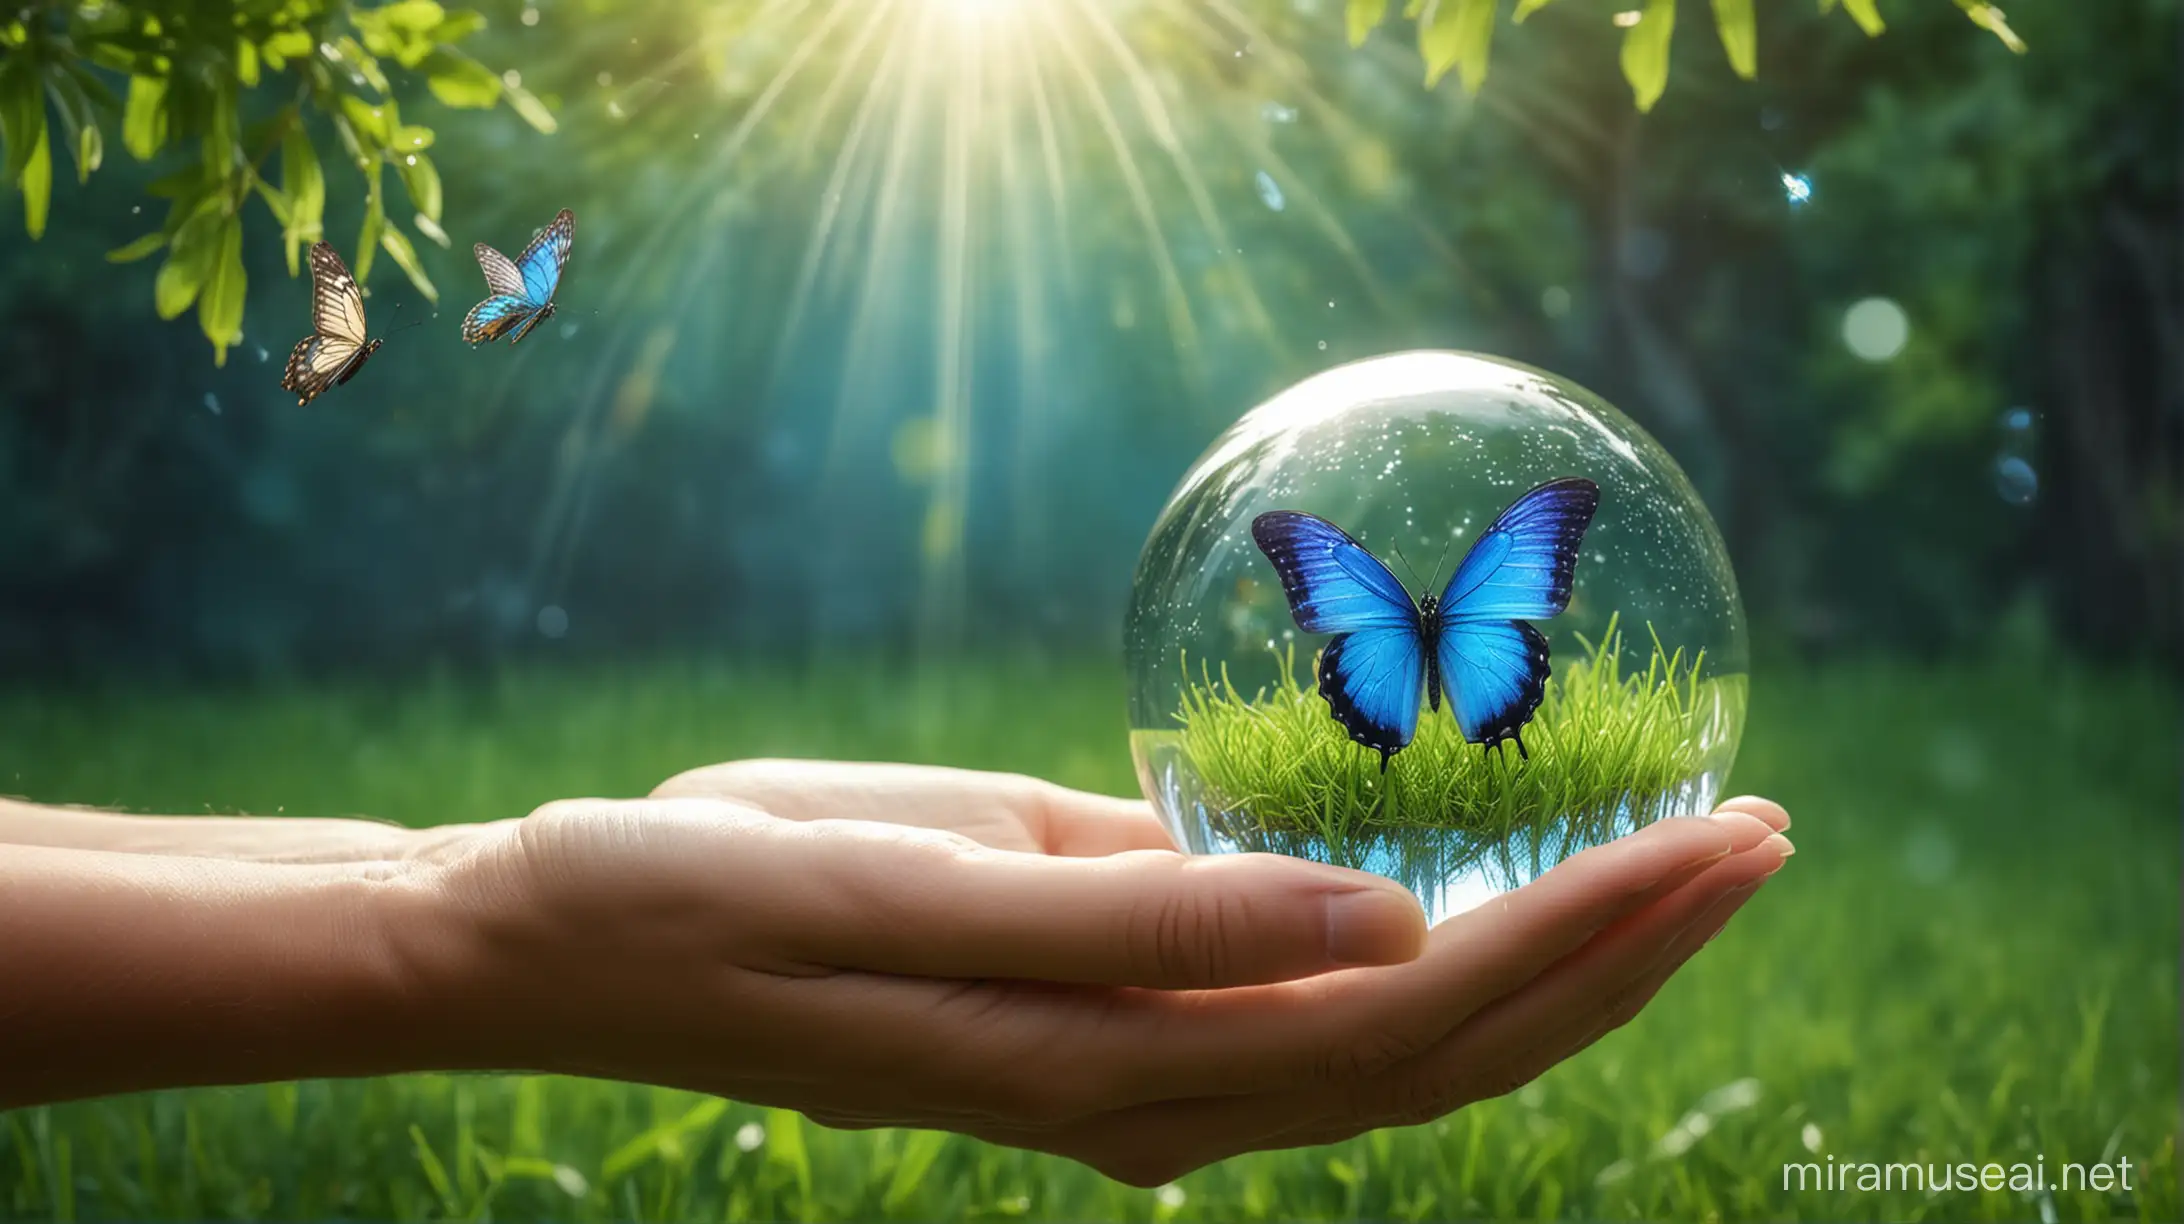 Earth crystal glass globe ball in human hand, flying butterfly with blue wings, fresh juicy grass background. 